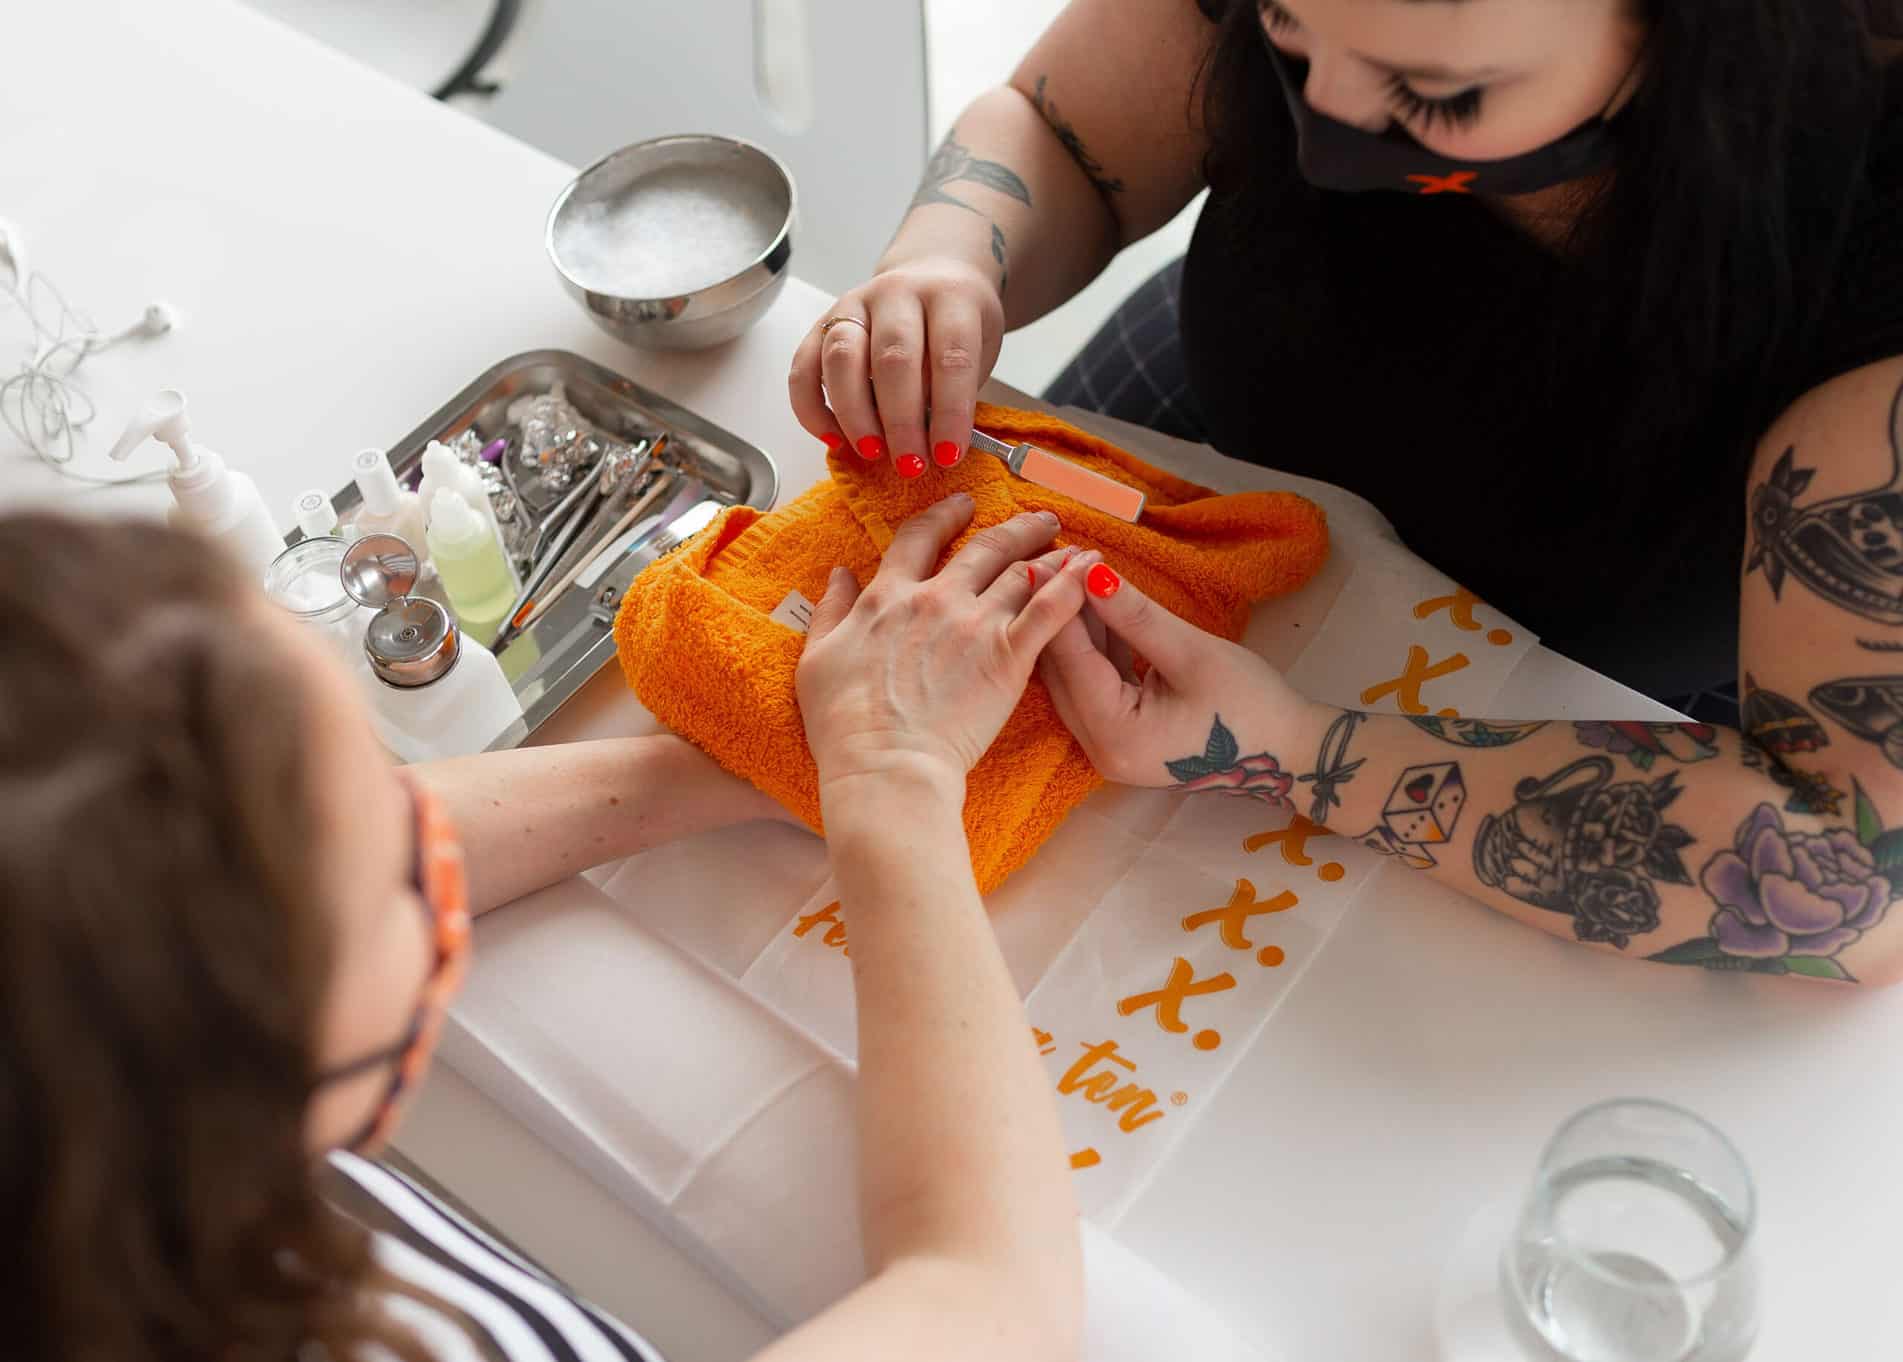 woman getting her nails filed with an orange file and orange towel